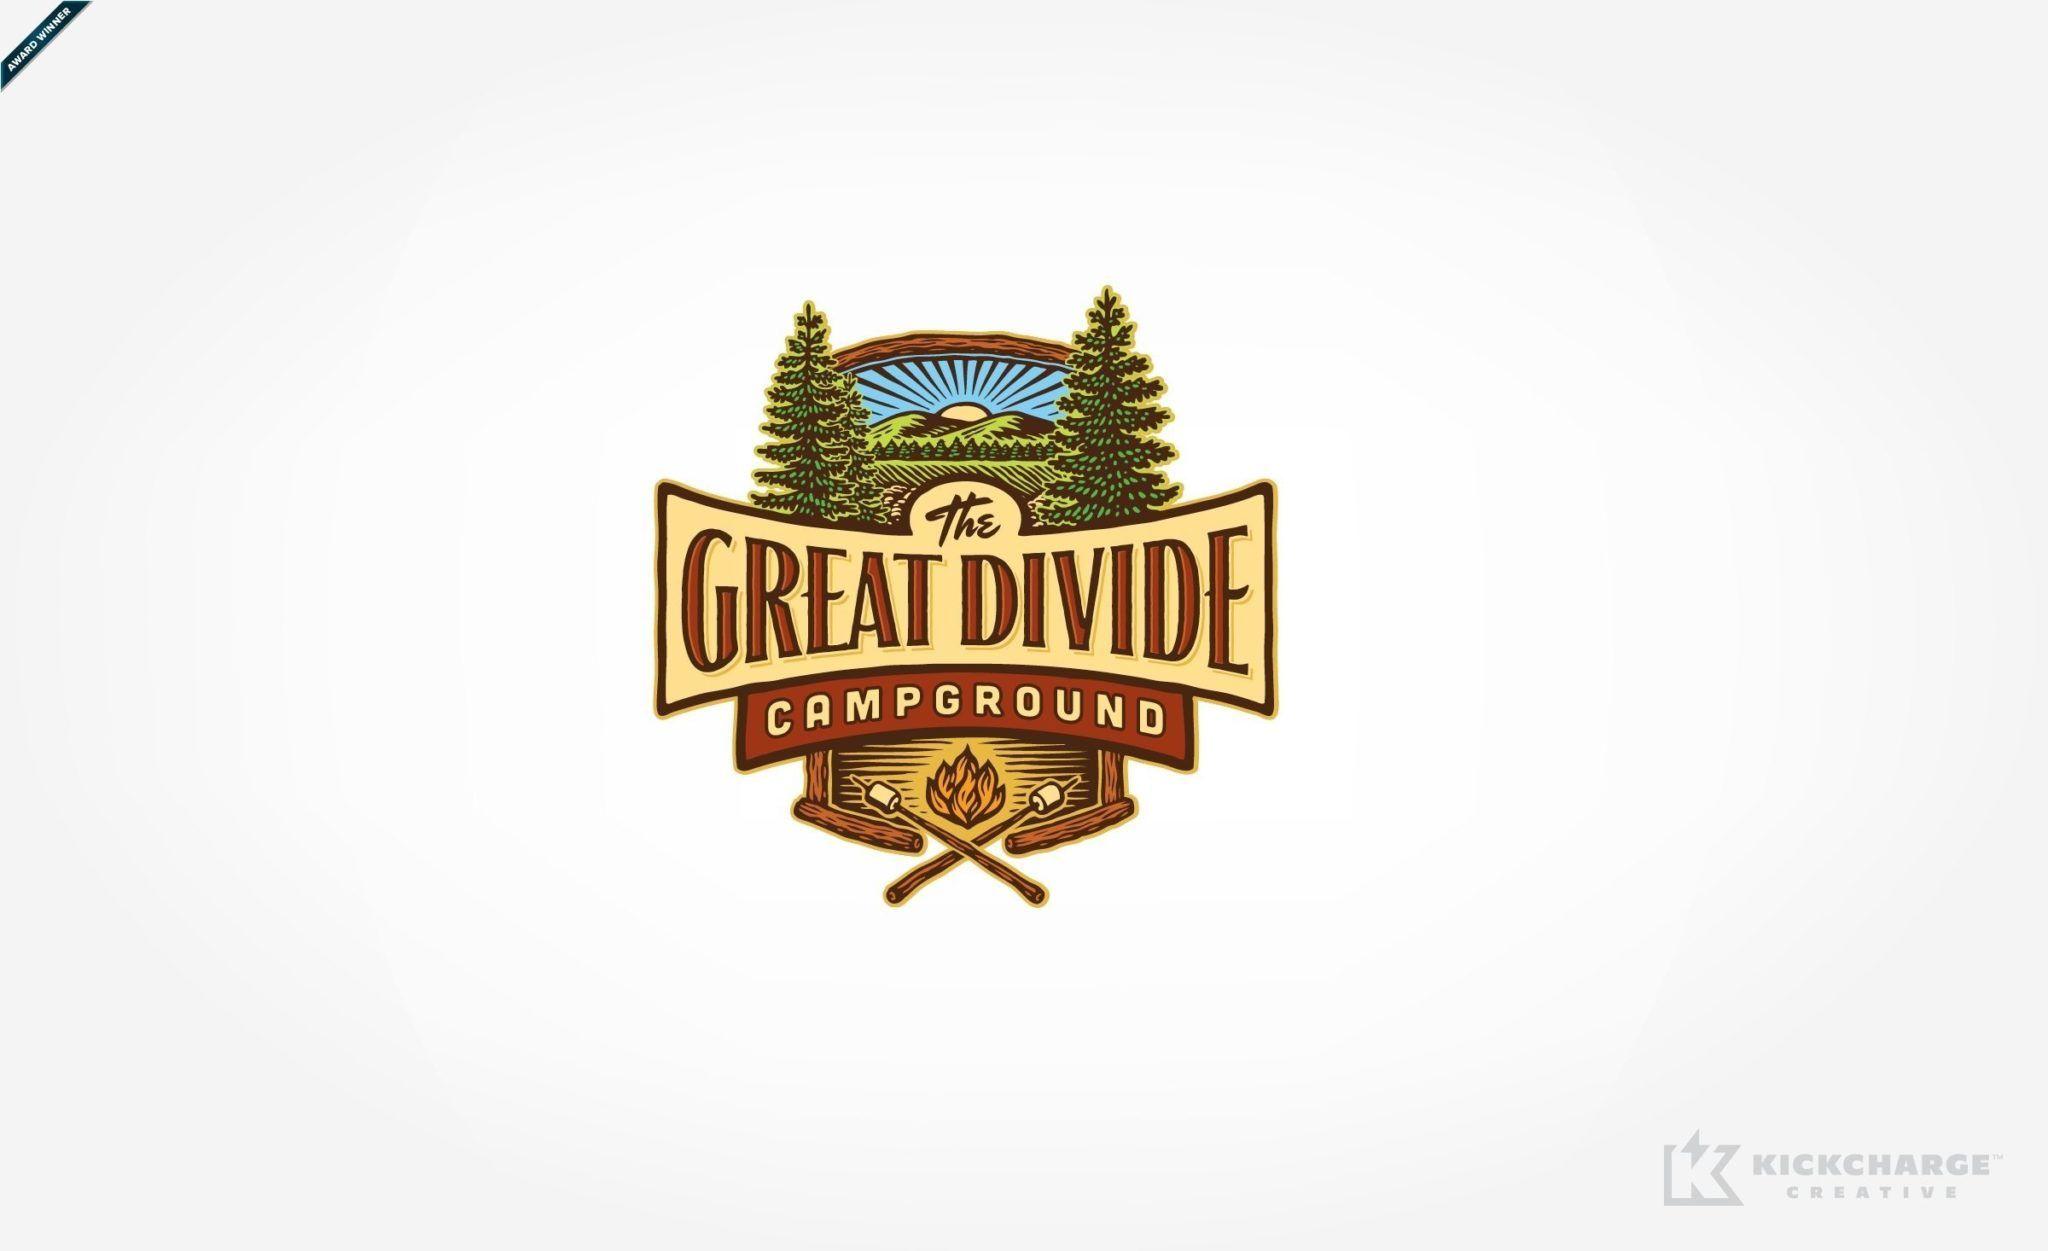 Campground Logo - The Great Divide Campground - KickCharge Creative | kickcharge.com ...